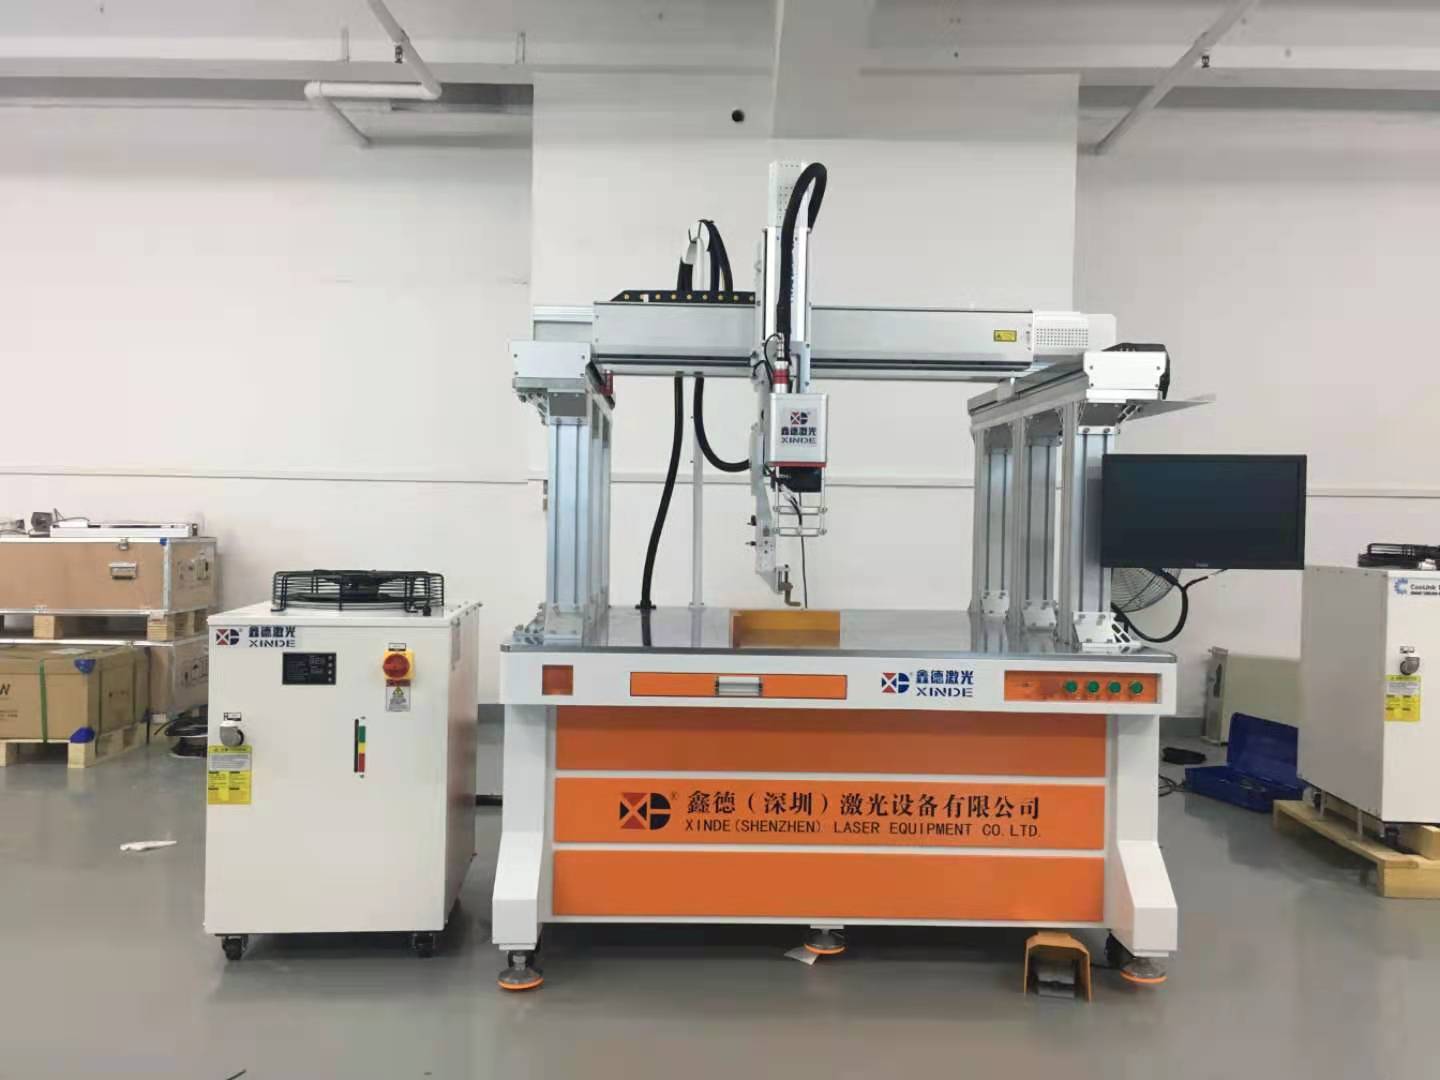 Three aspects of high-end manufacturing equipment - laser welding machine